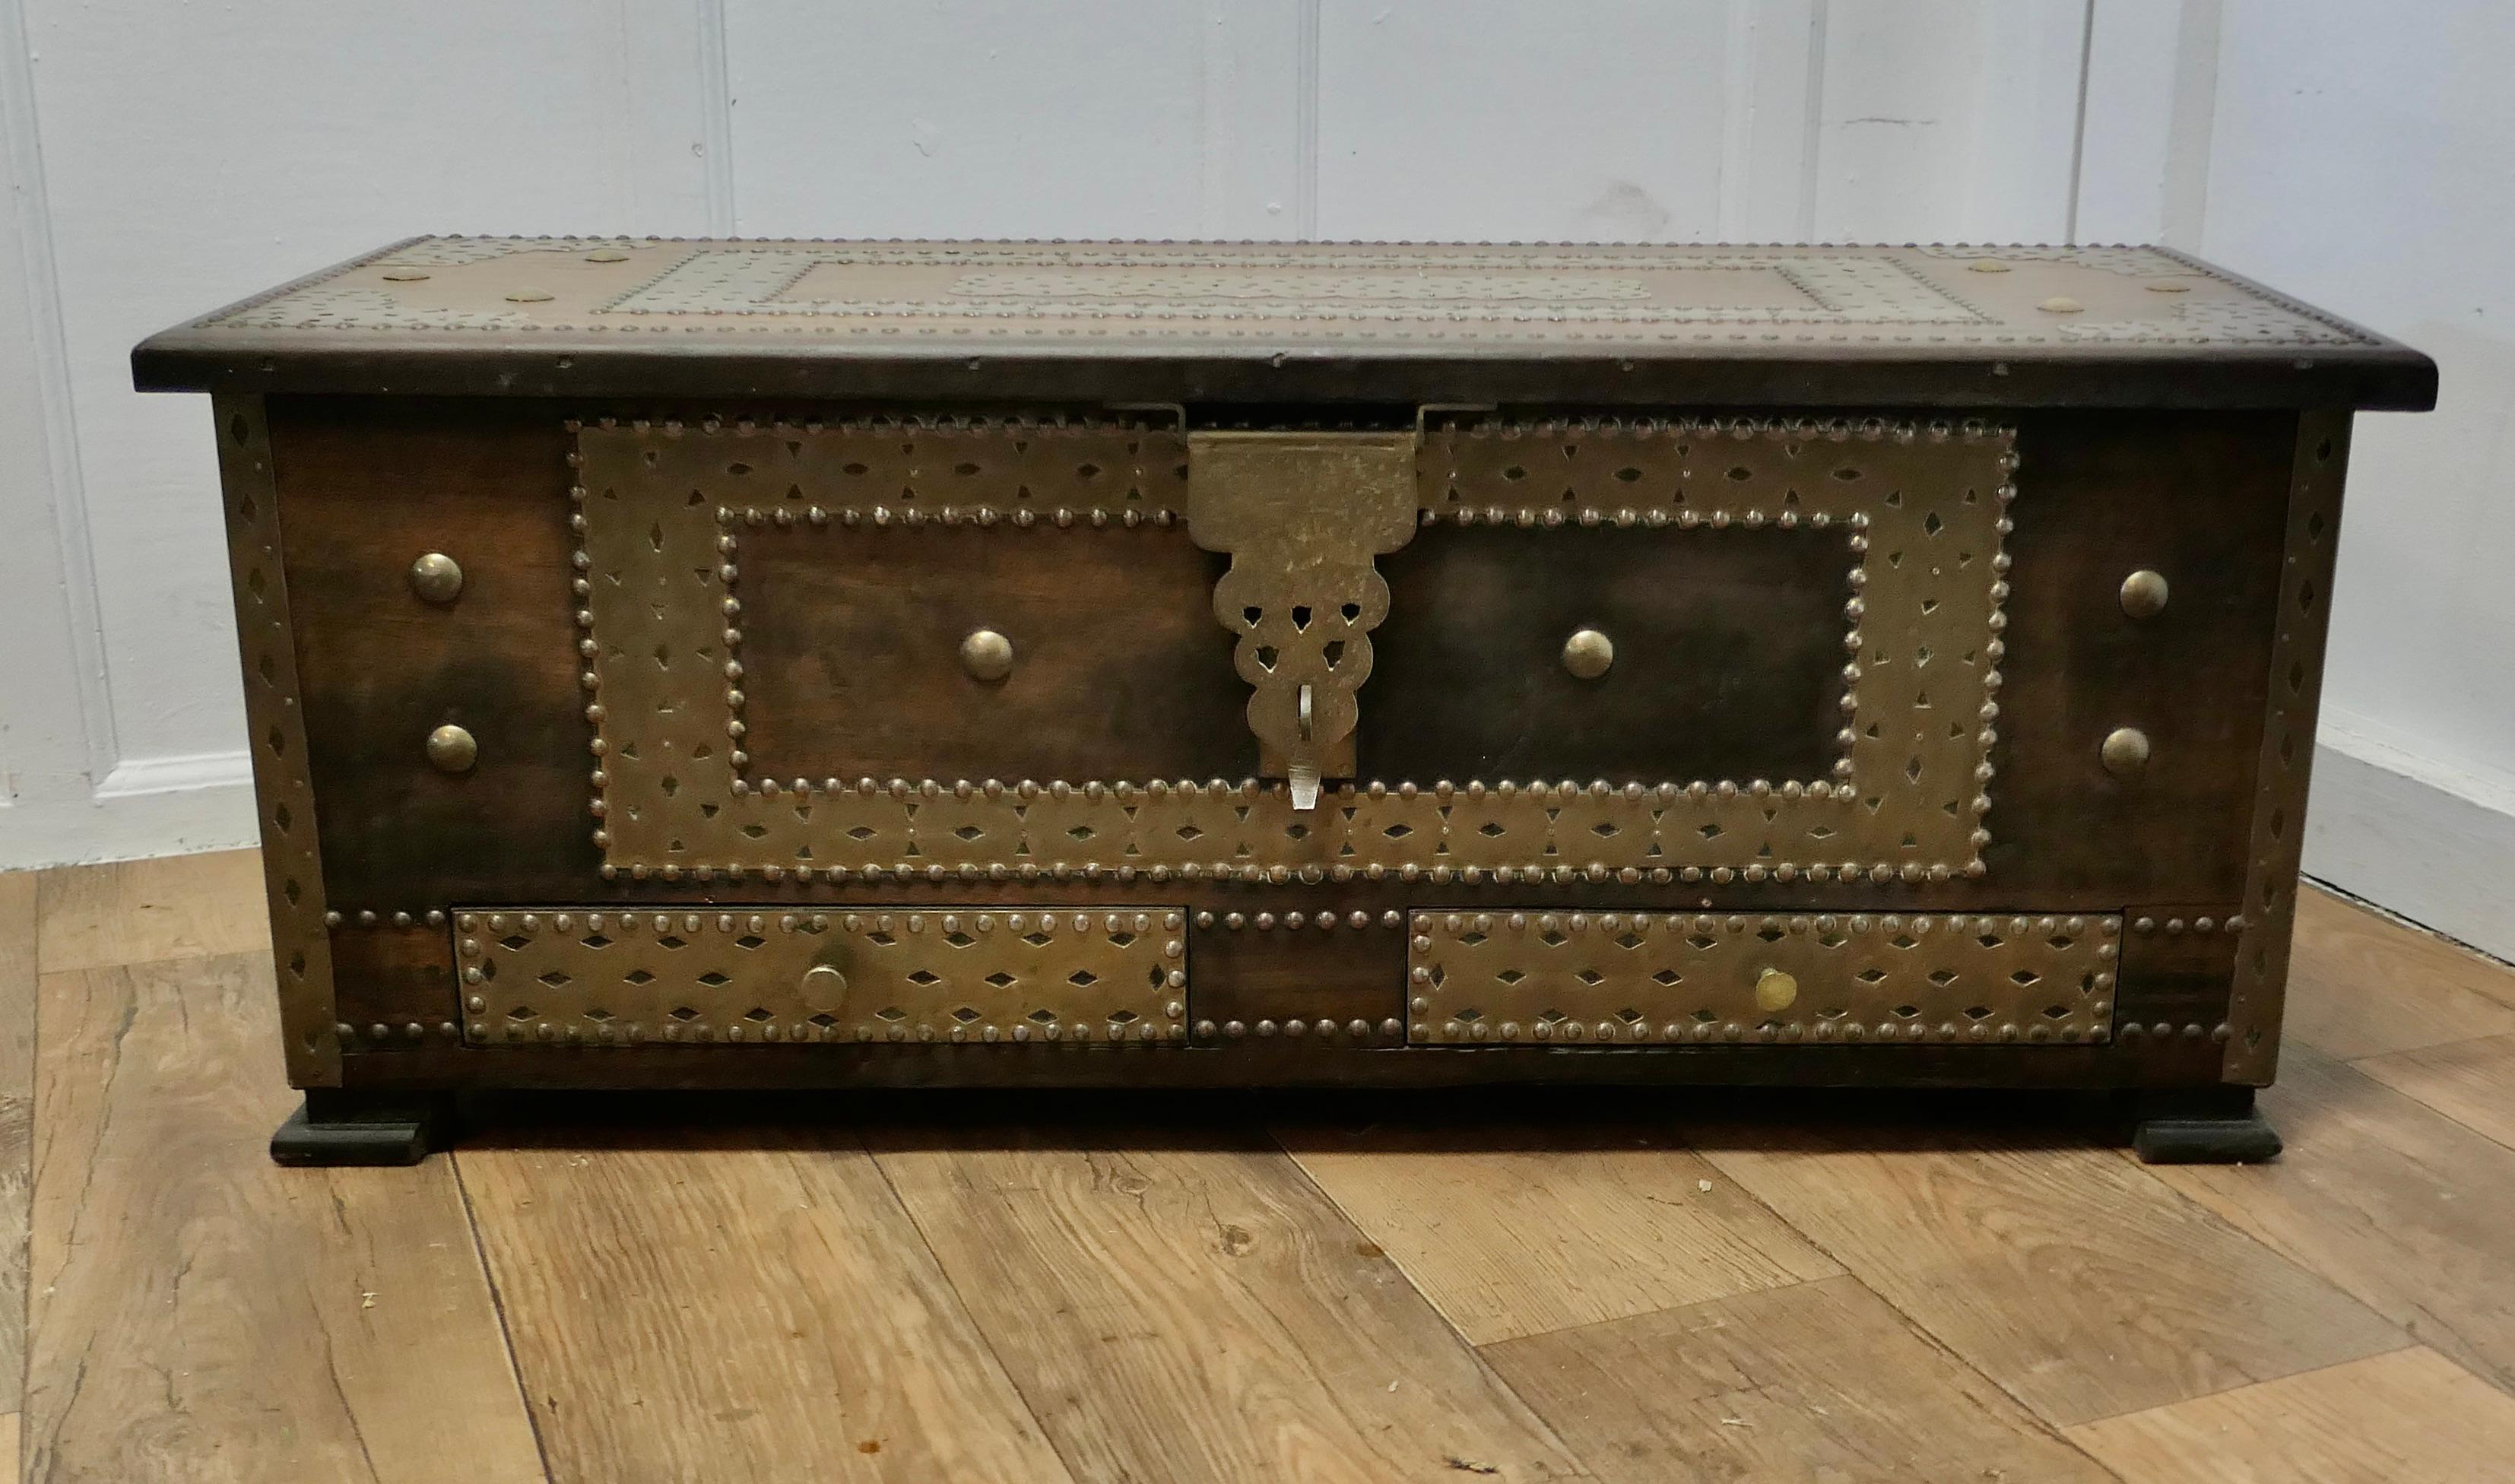 Large Decorative Brass Zanzibar Trunk with Drawers

This chest is in fact a mule Chest as it has 2 drawers at the bottom decorated with brass studs and fretwork and the brass hasp can be secured by adding you own clasp
Chests like this were often